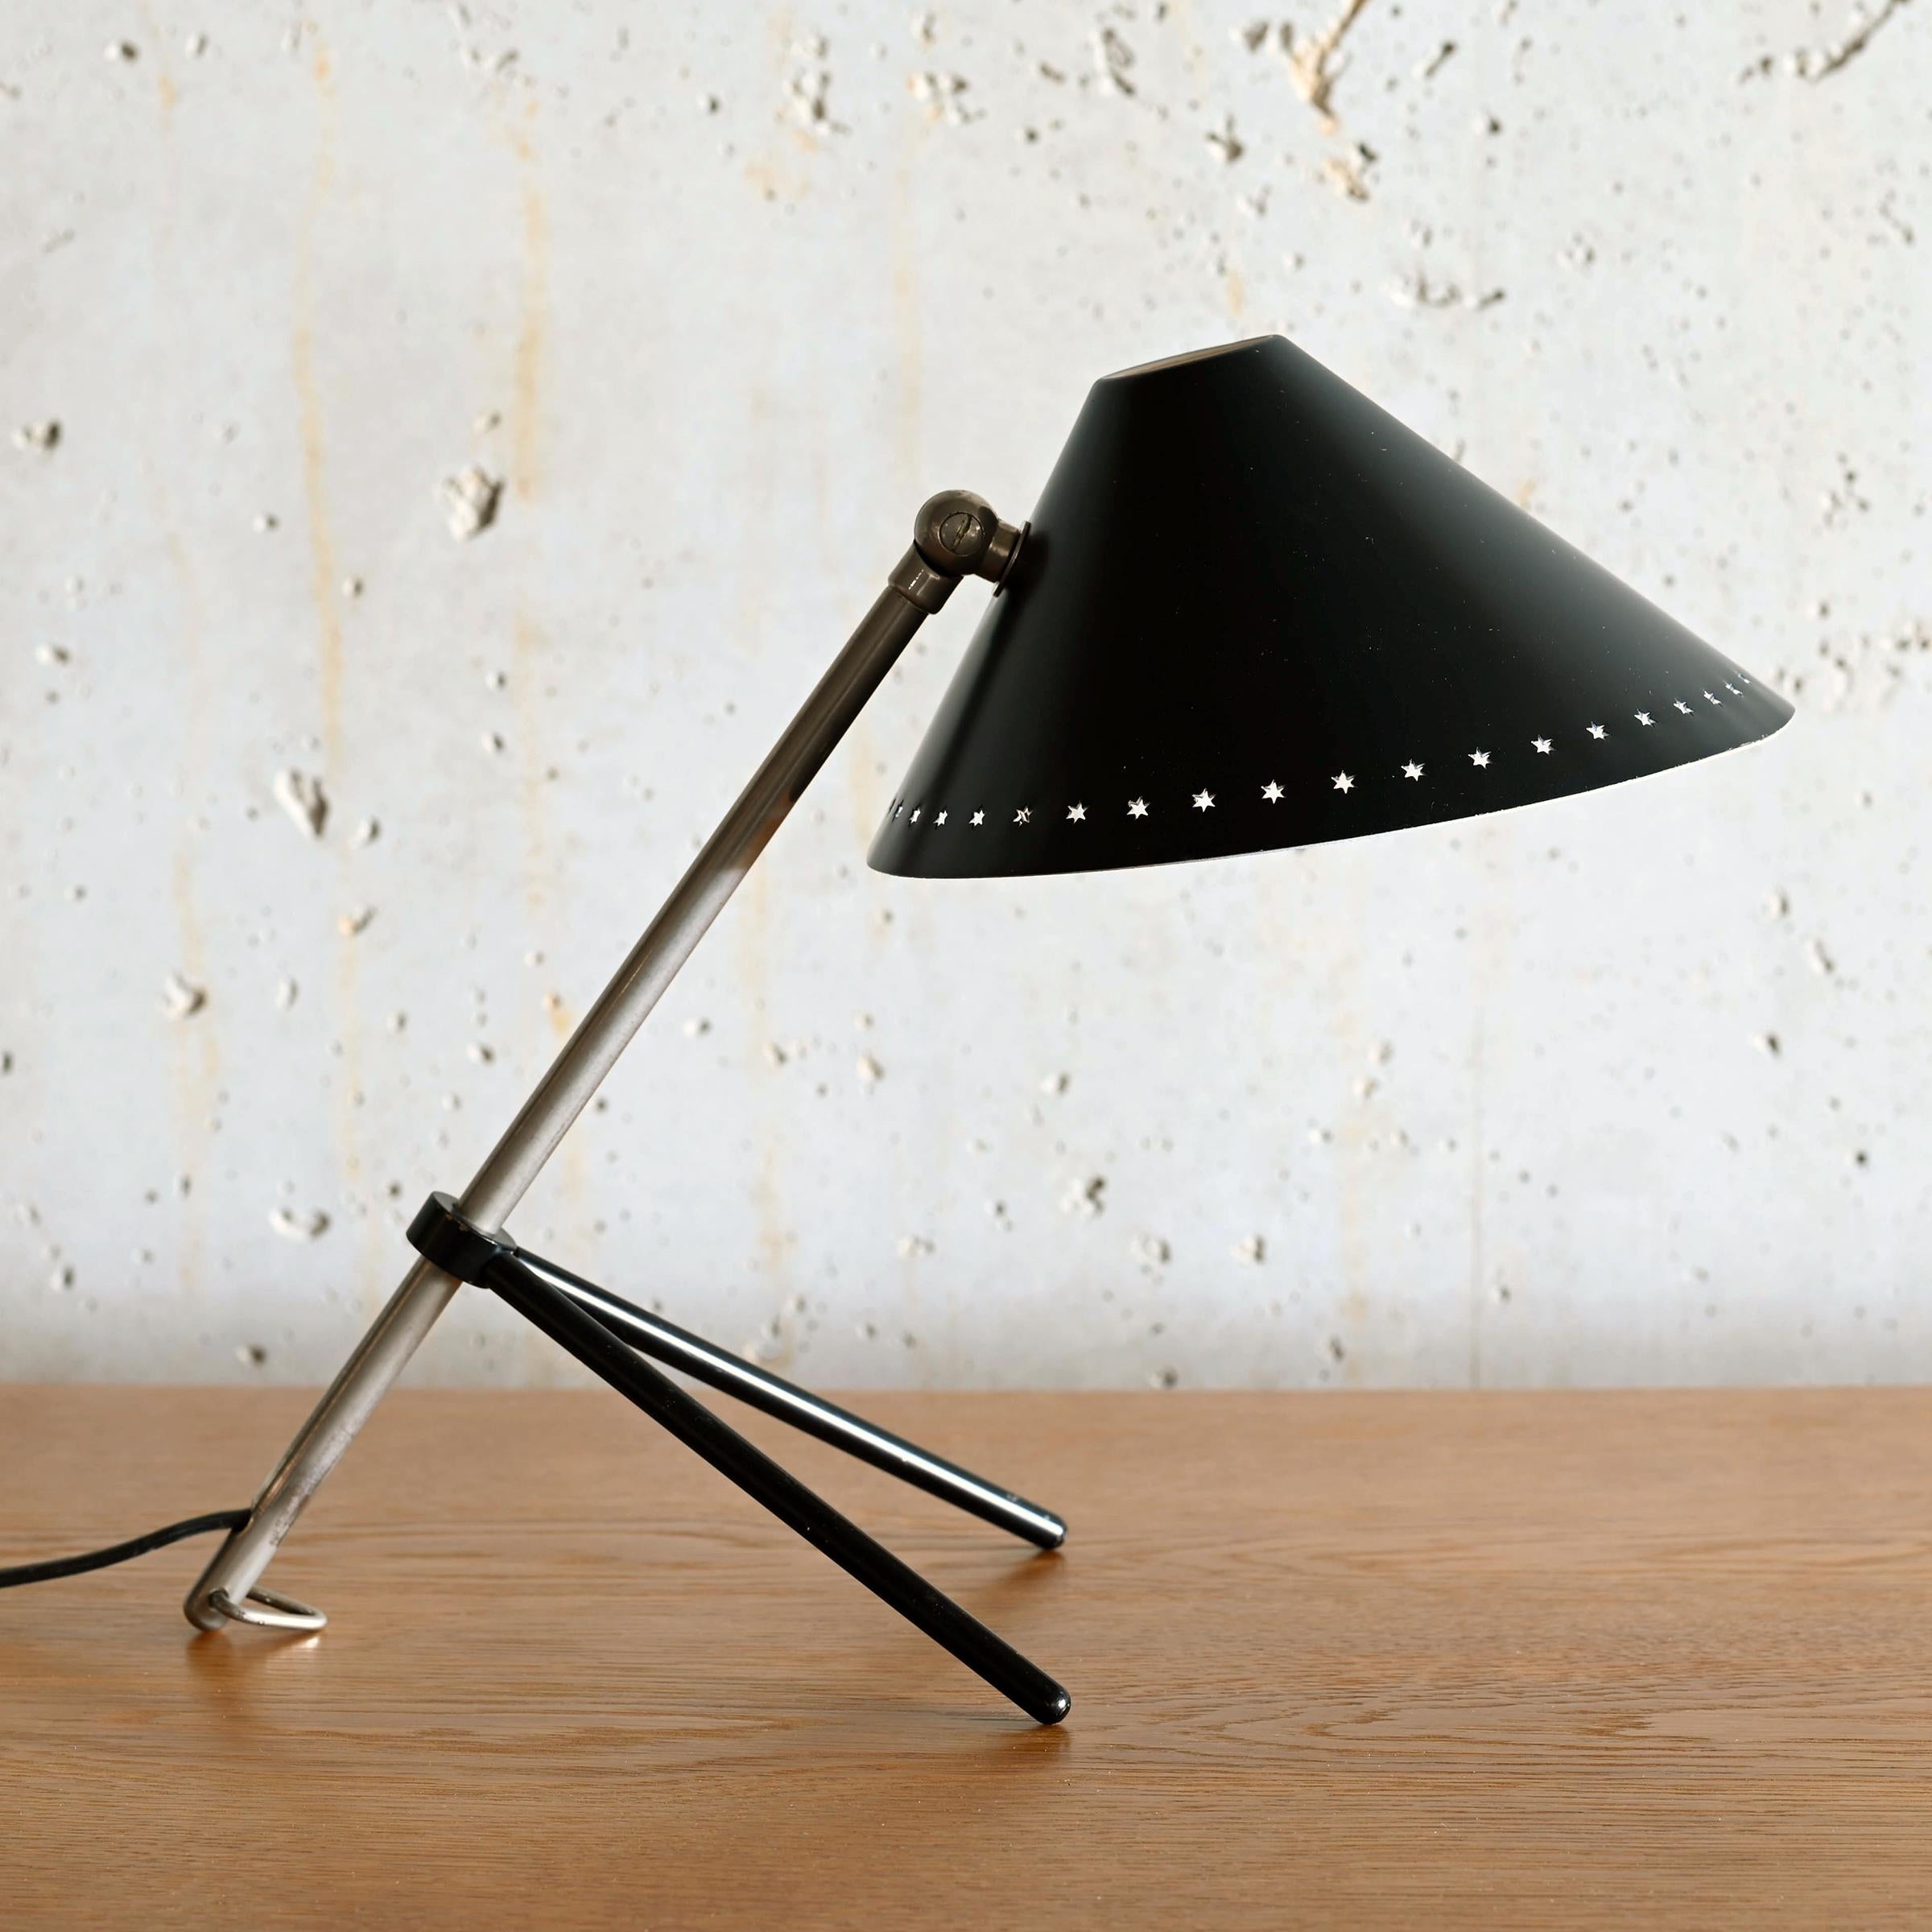 Elegant table or wall lamps for Dutch lighting company Hala. Tripod base adjustable in height and angle. Minimalistic, beautiful and well thought out designed lamp in very good vintage condition. The shade has been lightly restored / refinished. The